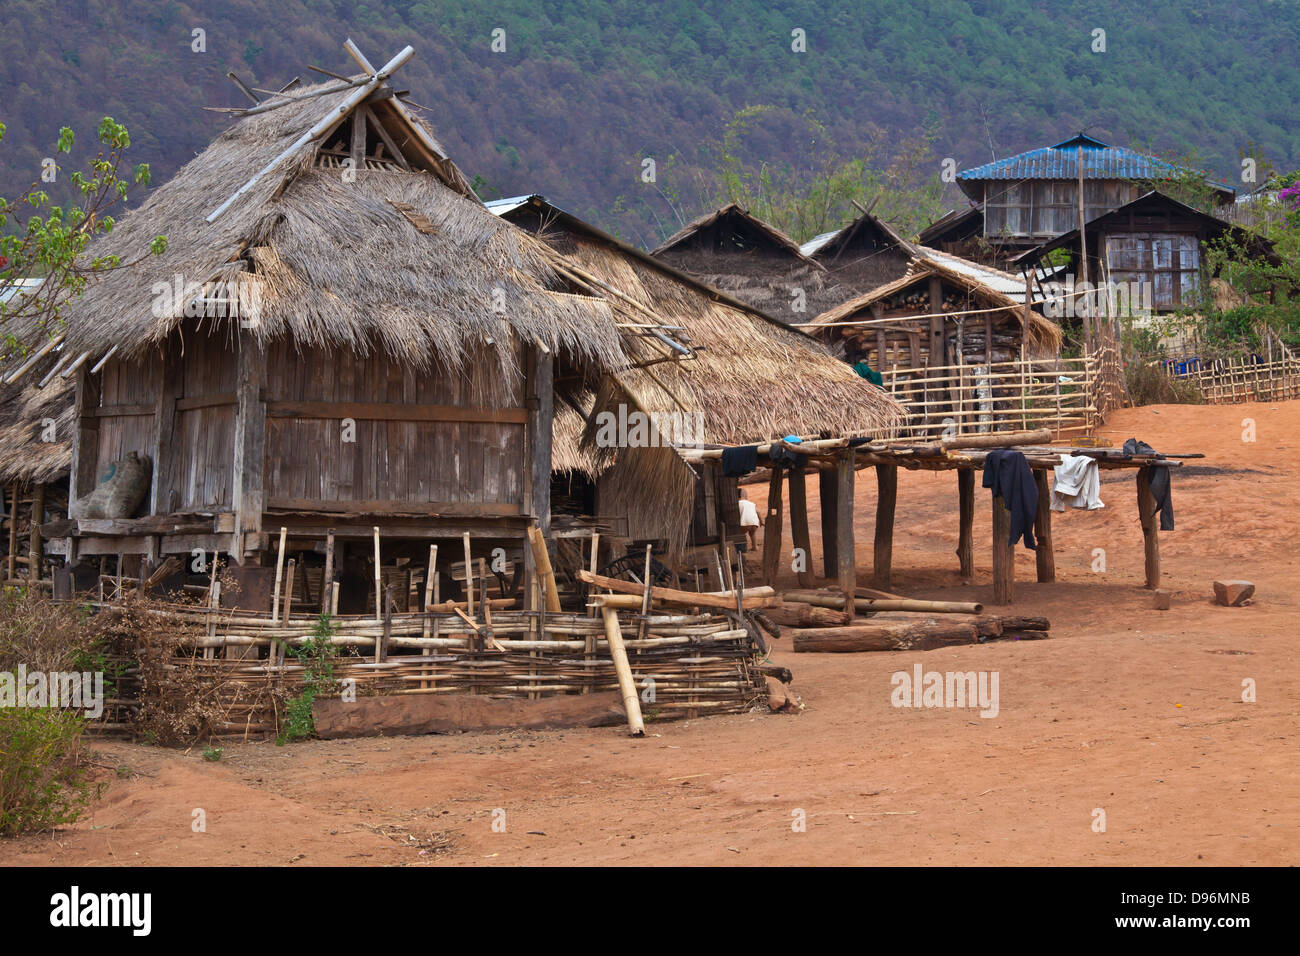 Houses in a typical AKHA village near KENGTUNG also known as KYAINGTONG - MYANMAR Stock Photo